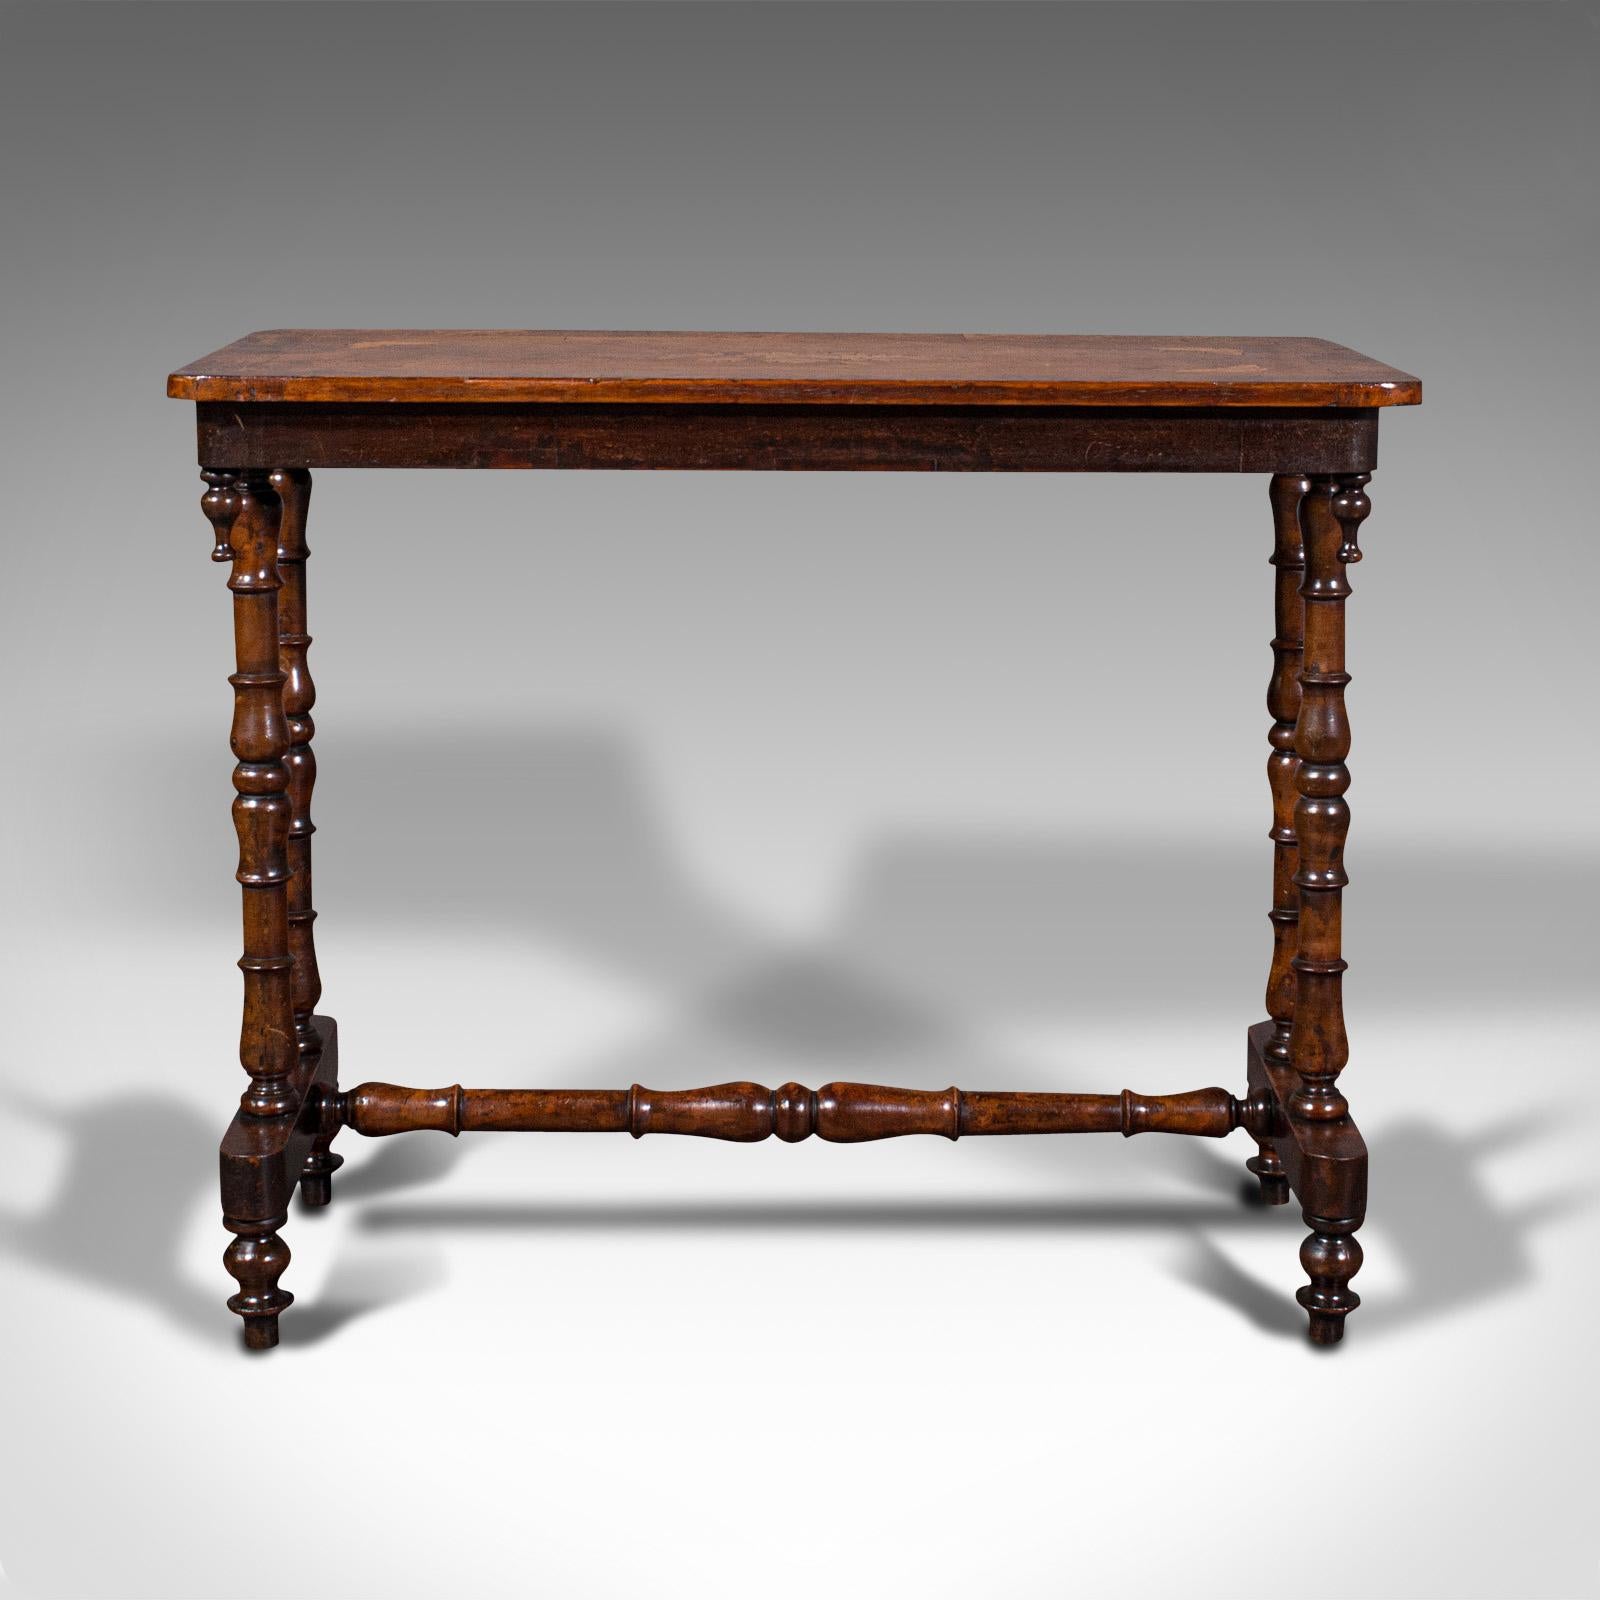 19th Century Antique Console Table, English, Walnut, Decorative, Side, Occasional, Regency